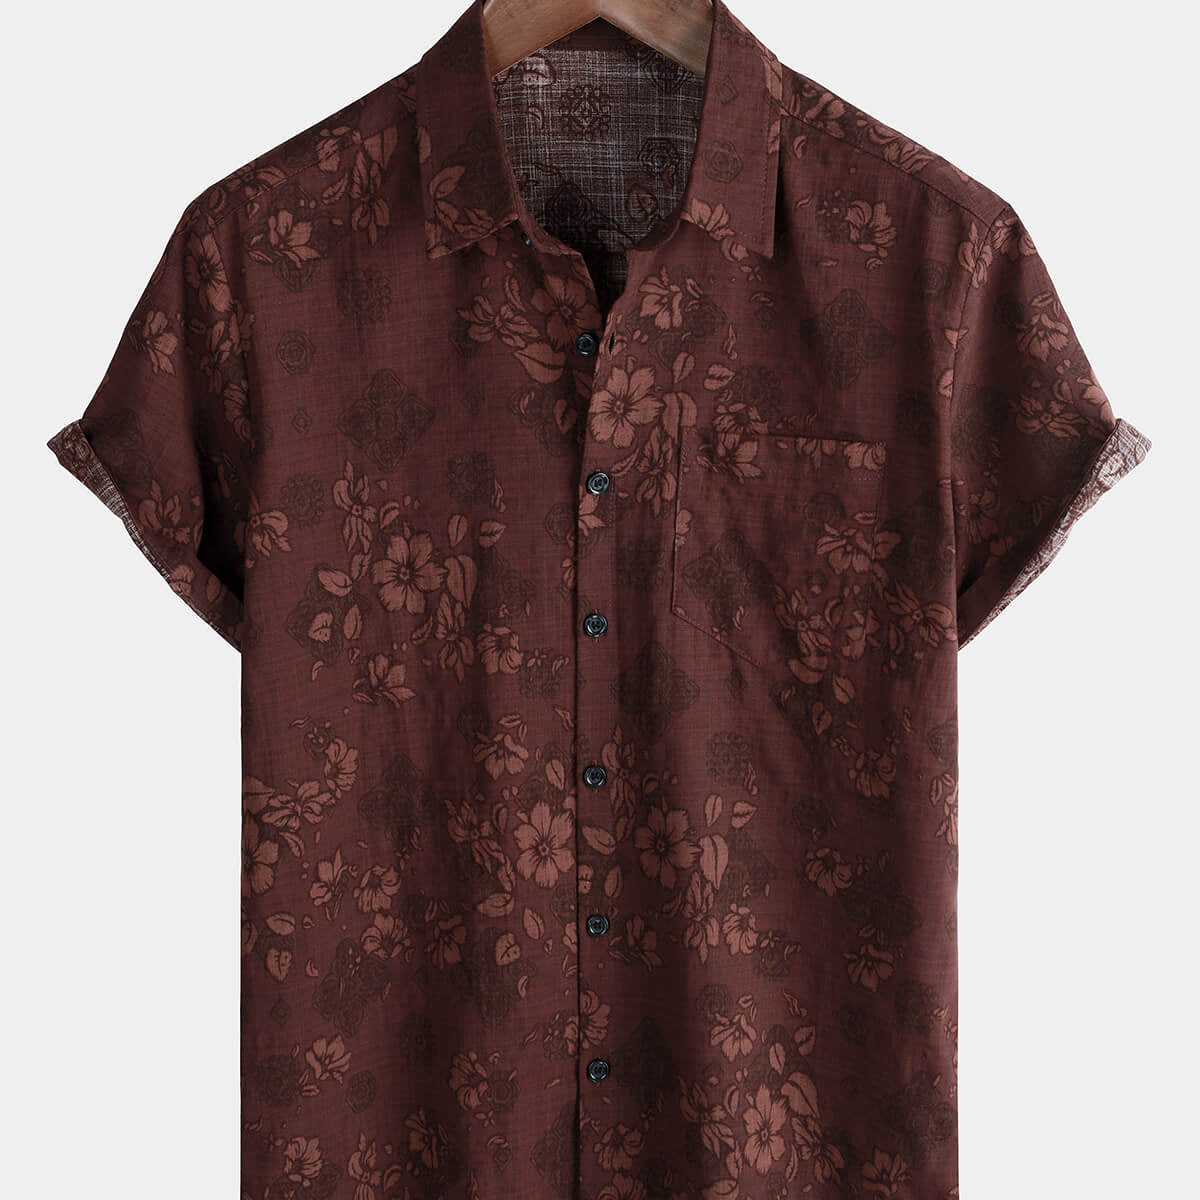 Men's Floral Holiday Casual Summer Red Short Sleeve Button Up Shirt